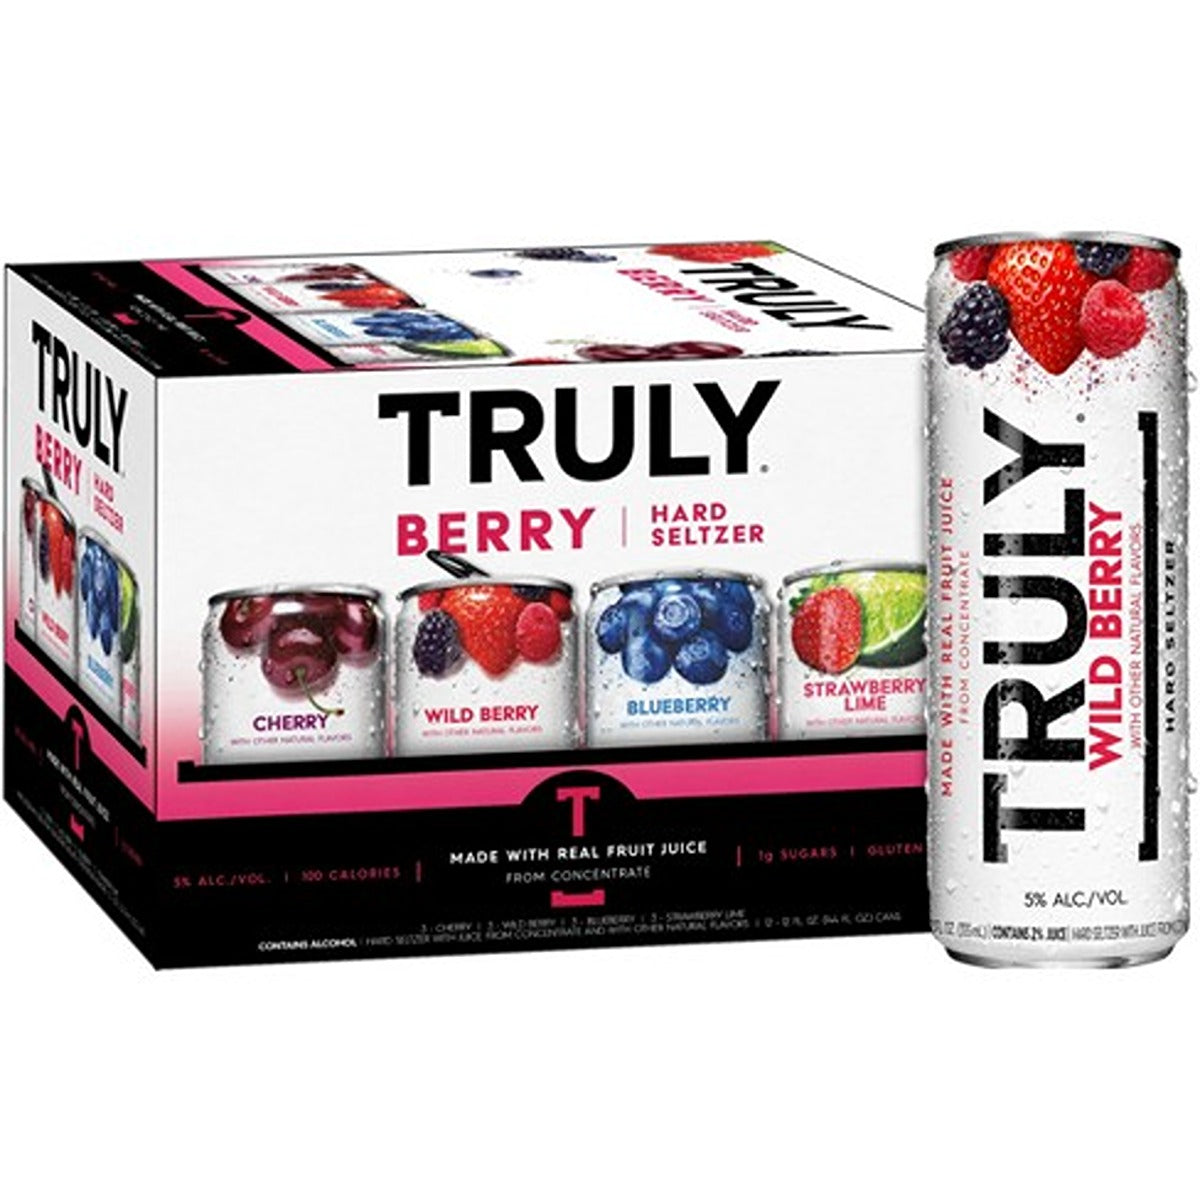 TRULY BERRY MIX 12PK